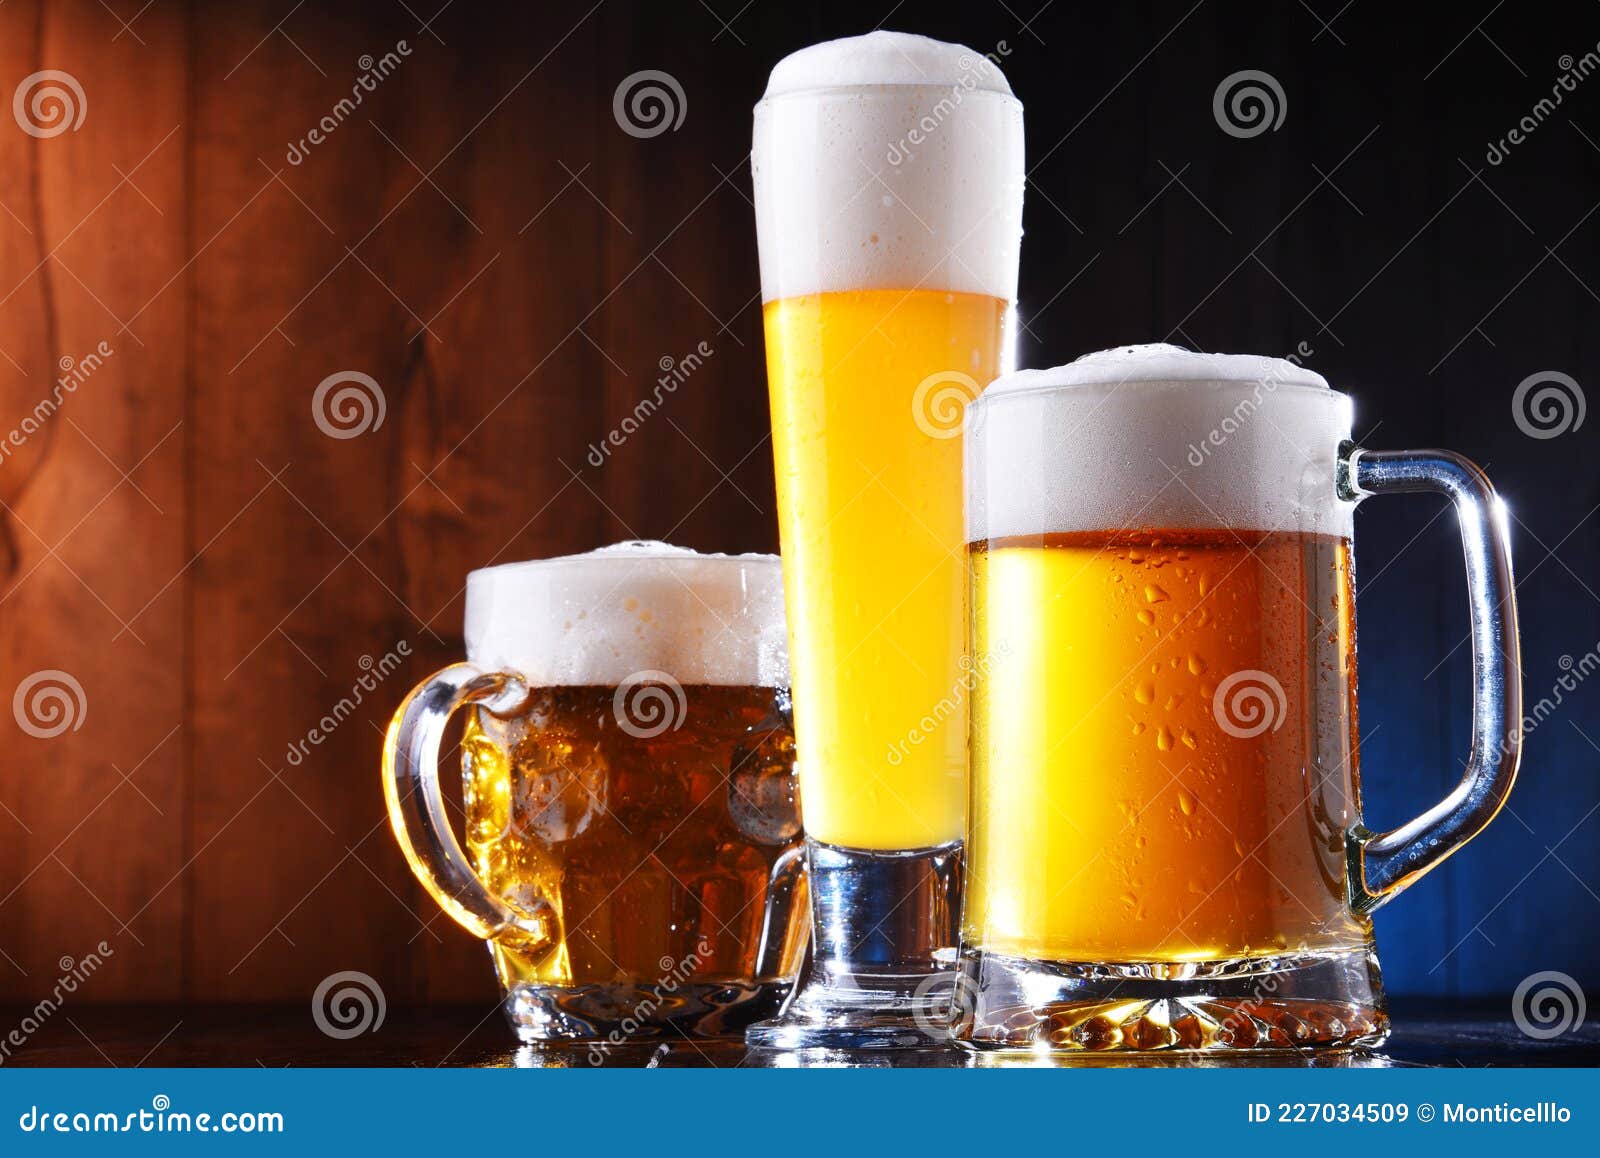 Composition with Glasses of Beer of Various Kinds Stock Image - Image ...